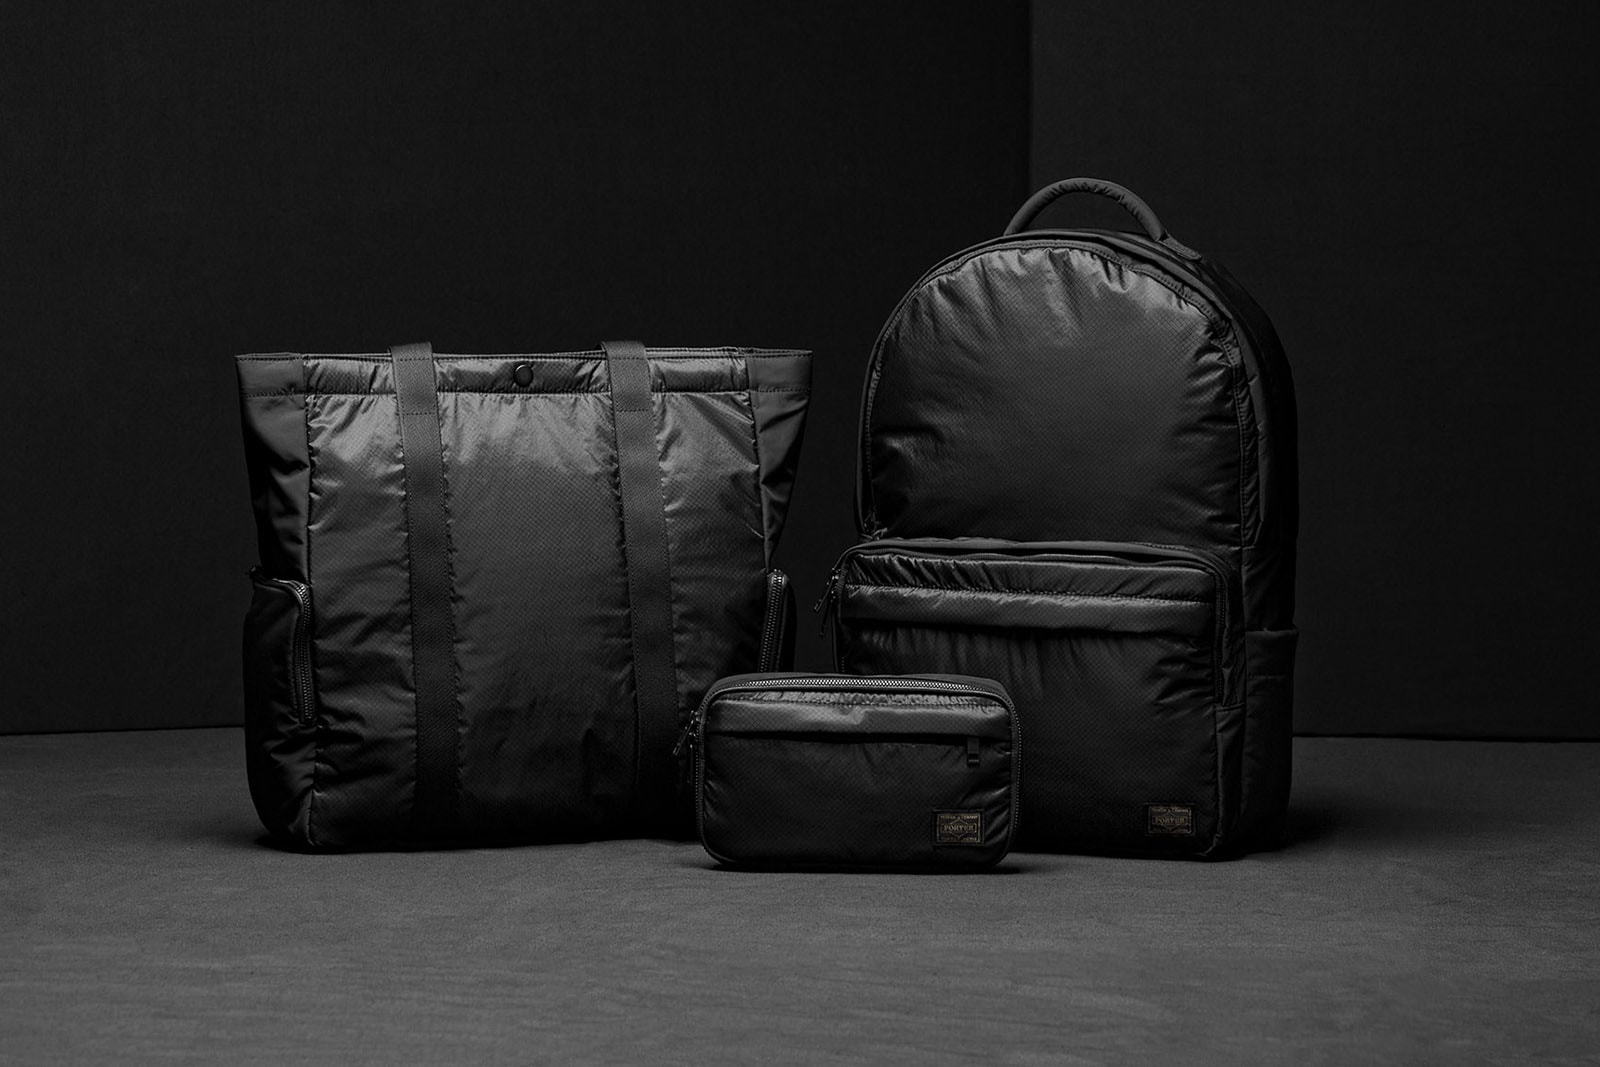 wings+horns x Porter Fall/Winter 2018 Collection Cop Purchase Buy Tote Daypack Backpack Tote Bag Dopp Kit